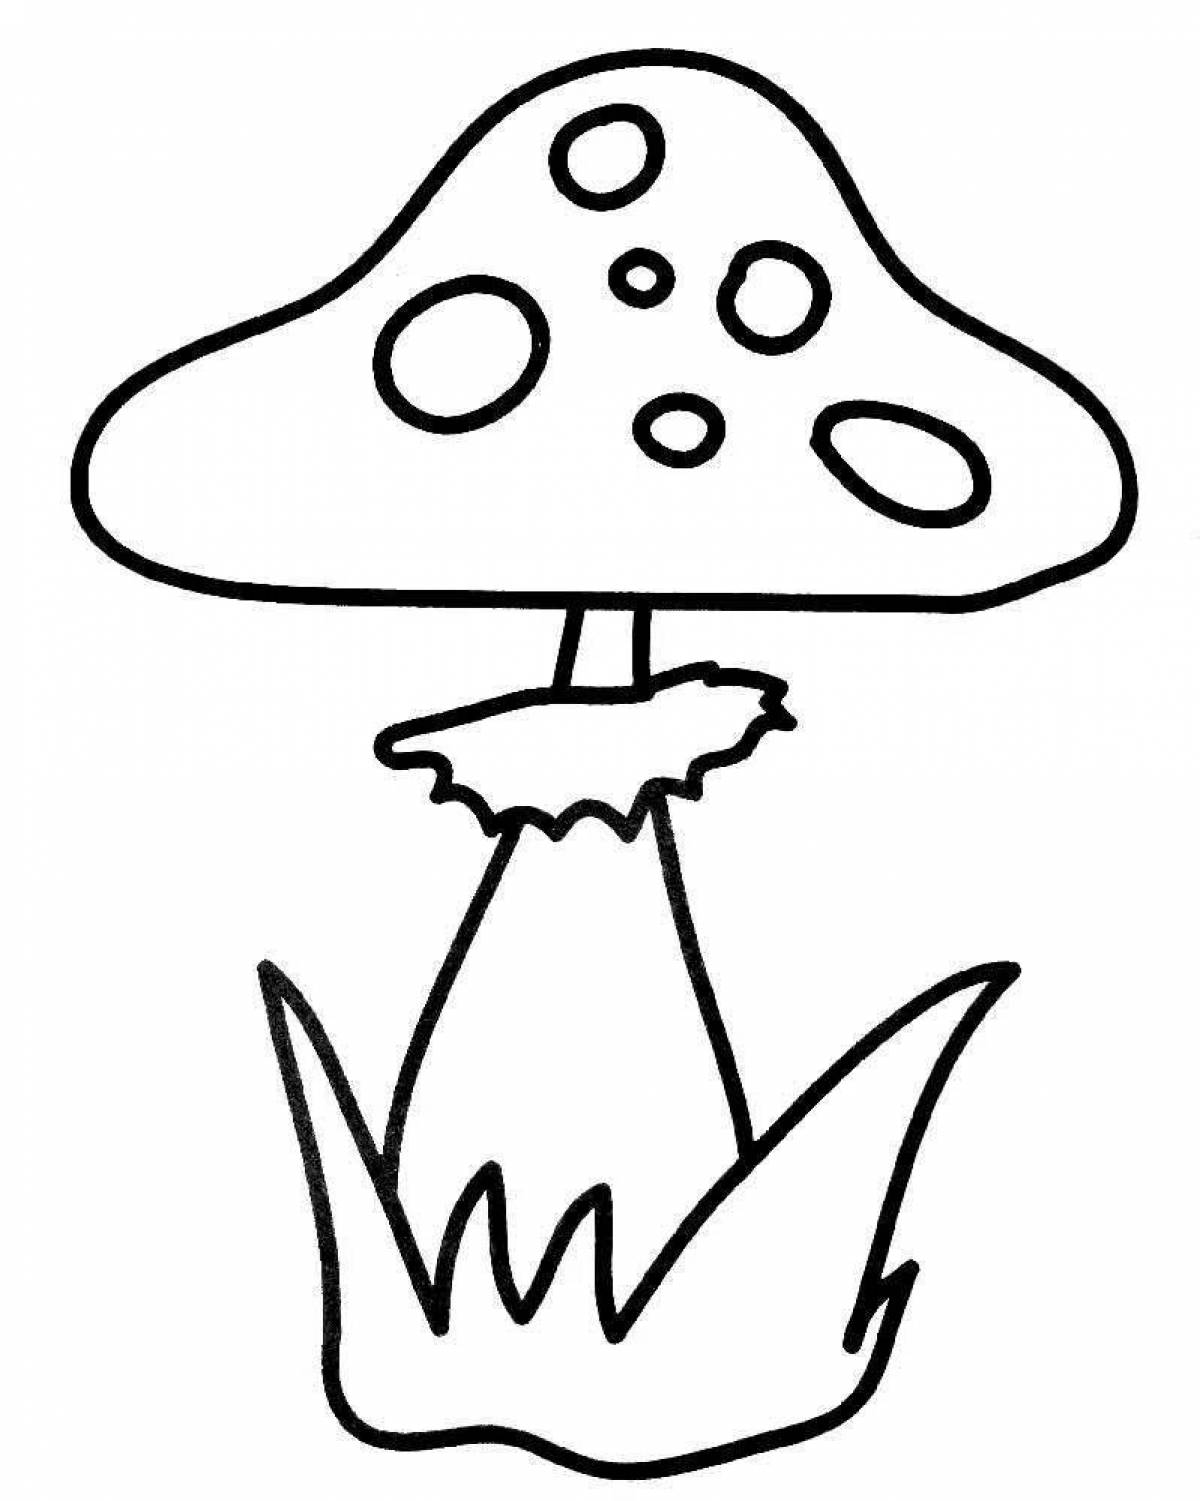 Coloring book glowing fly agaric